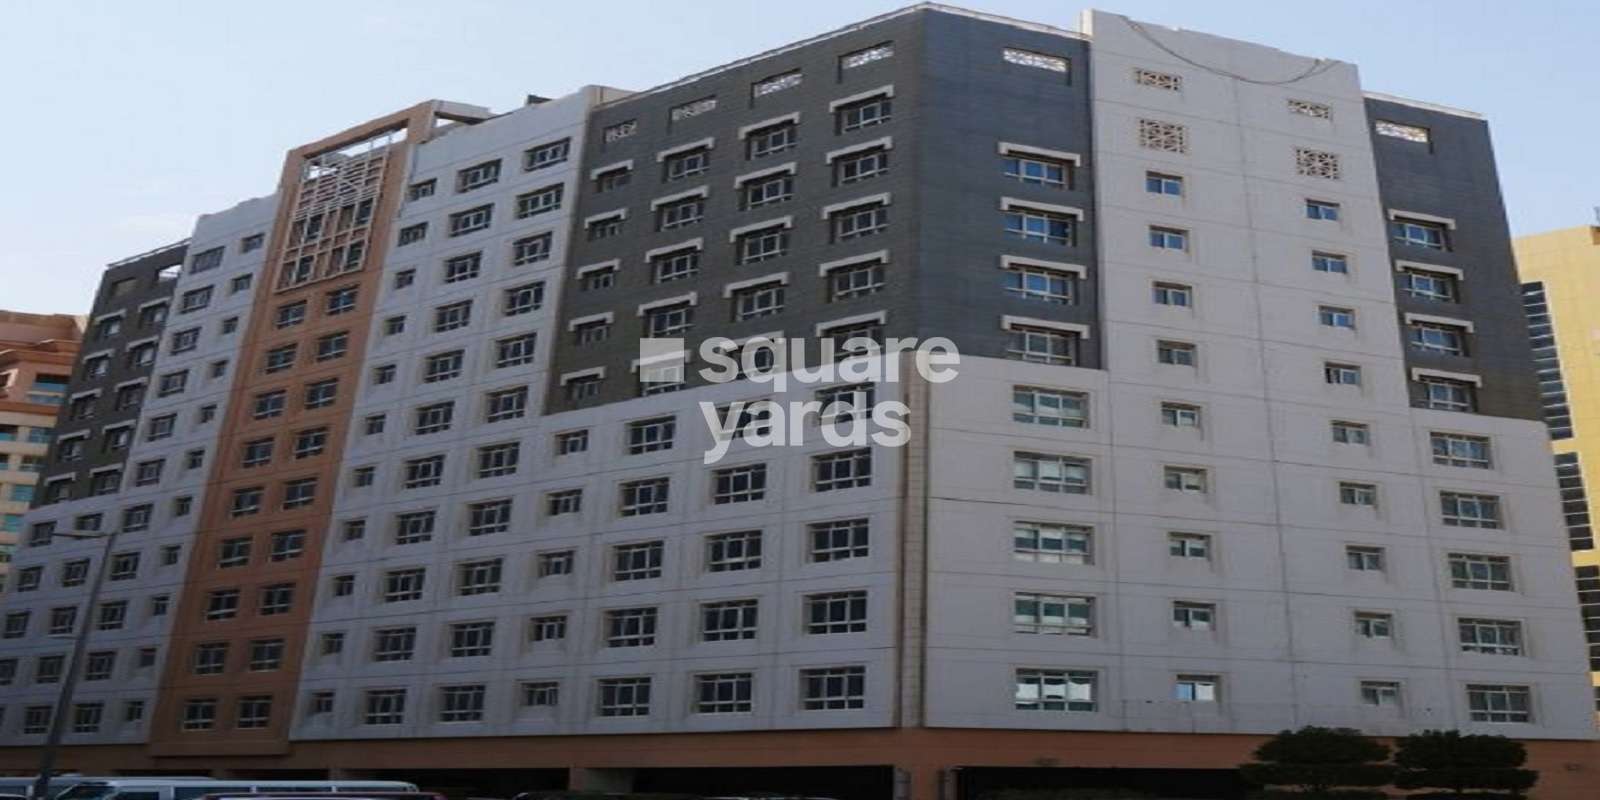 Ramee Guestline Hotel Apartments Cover Image